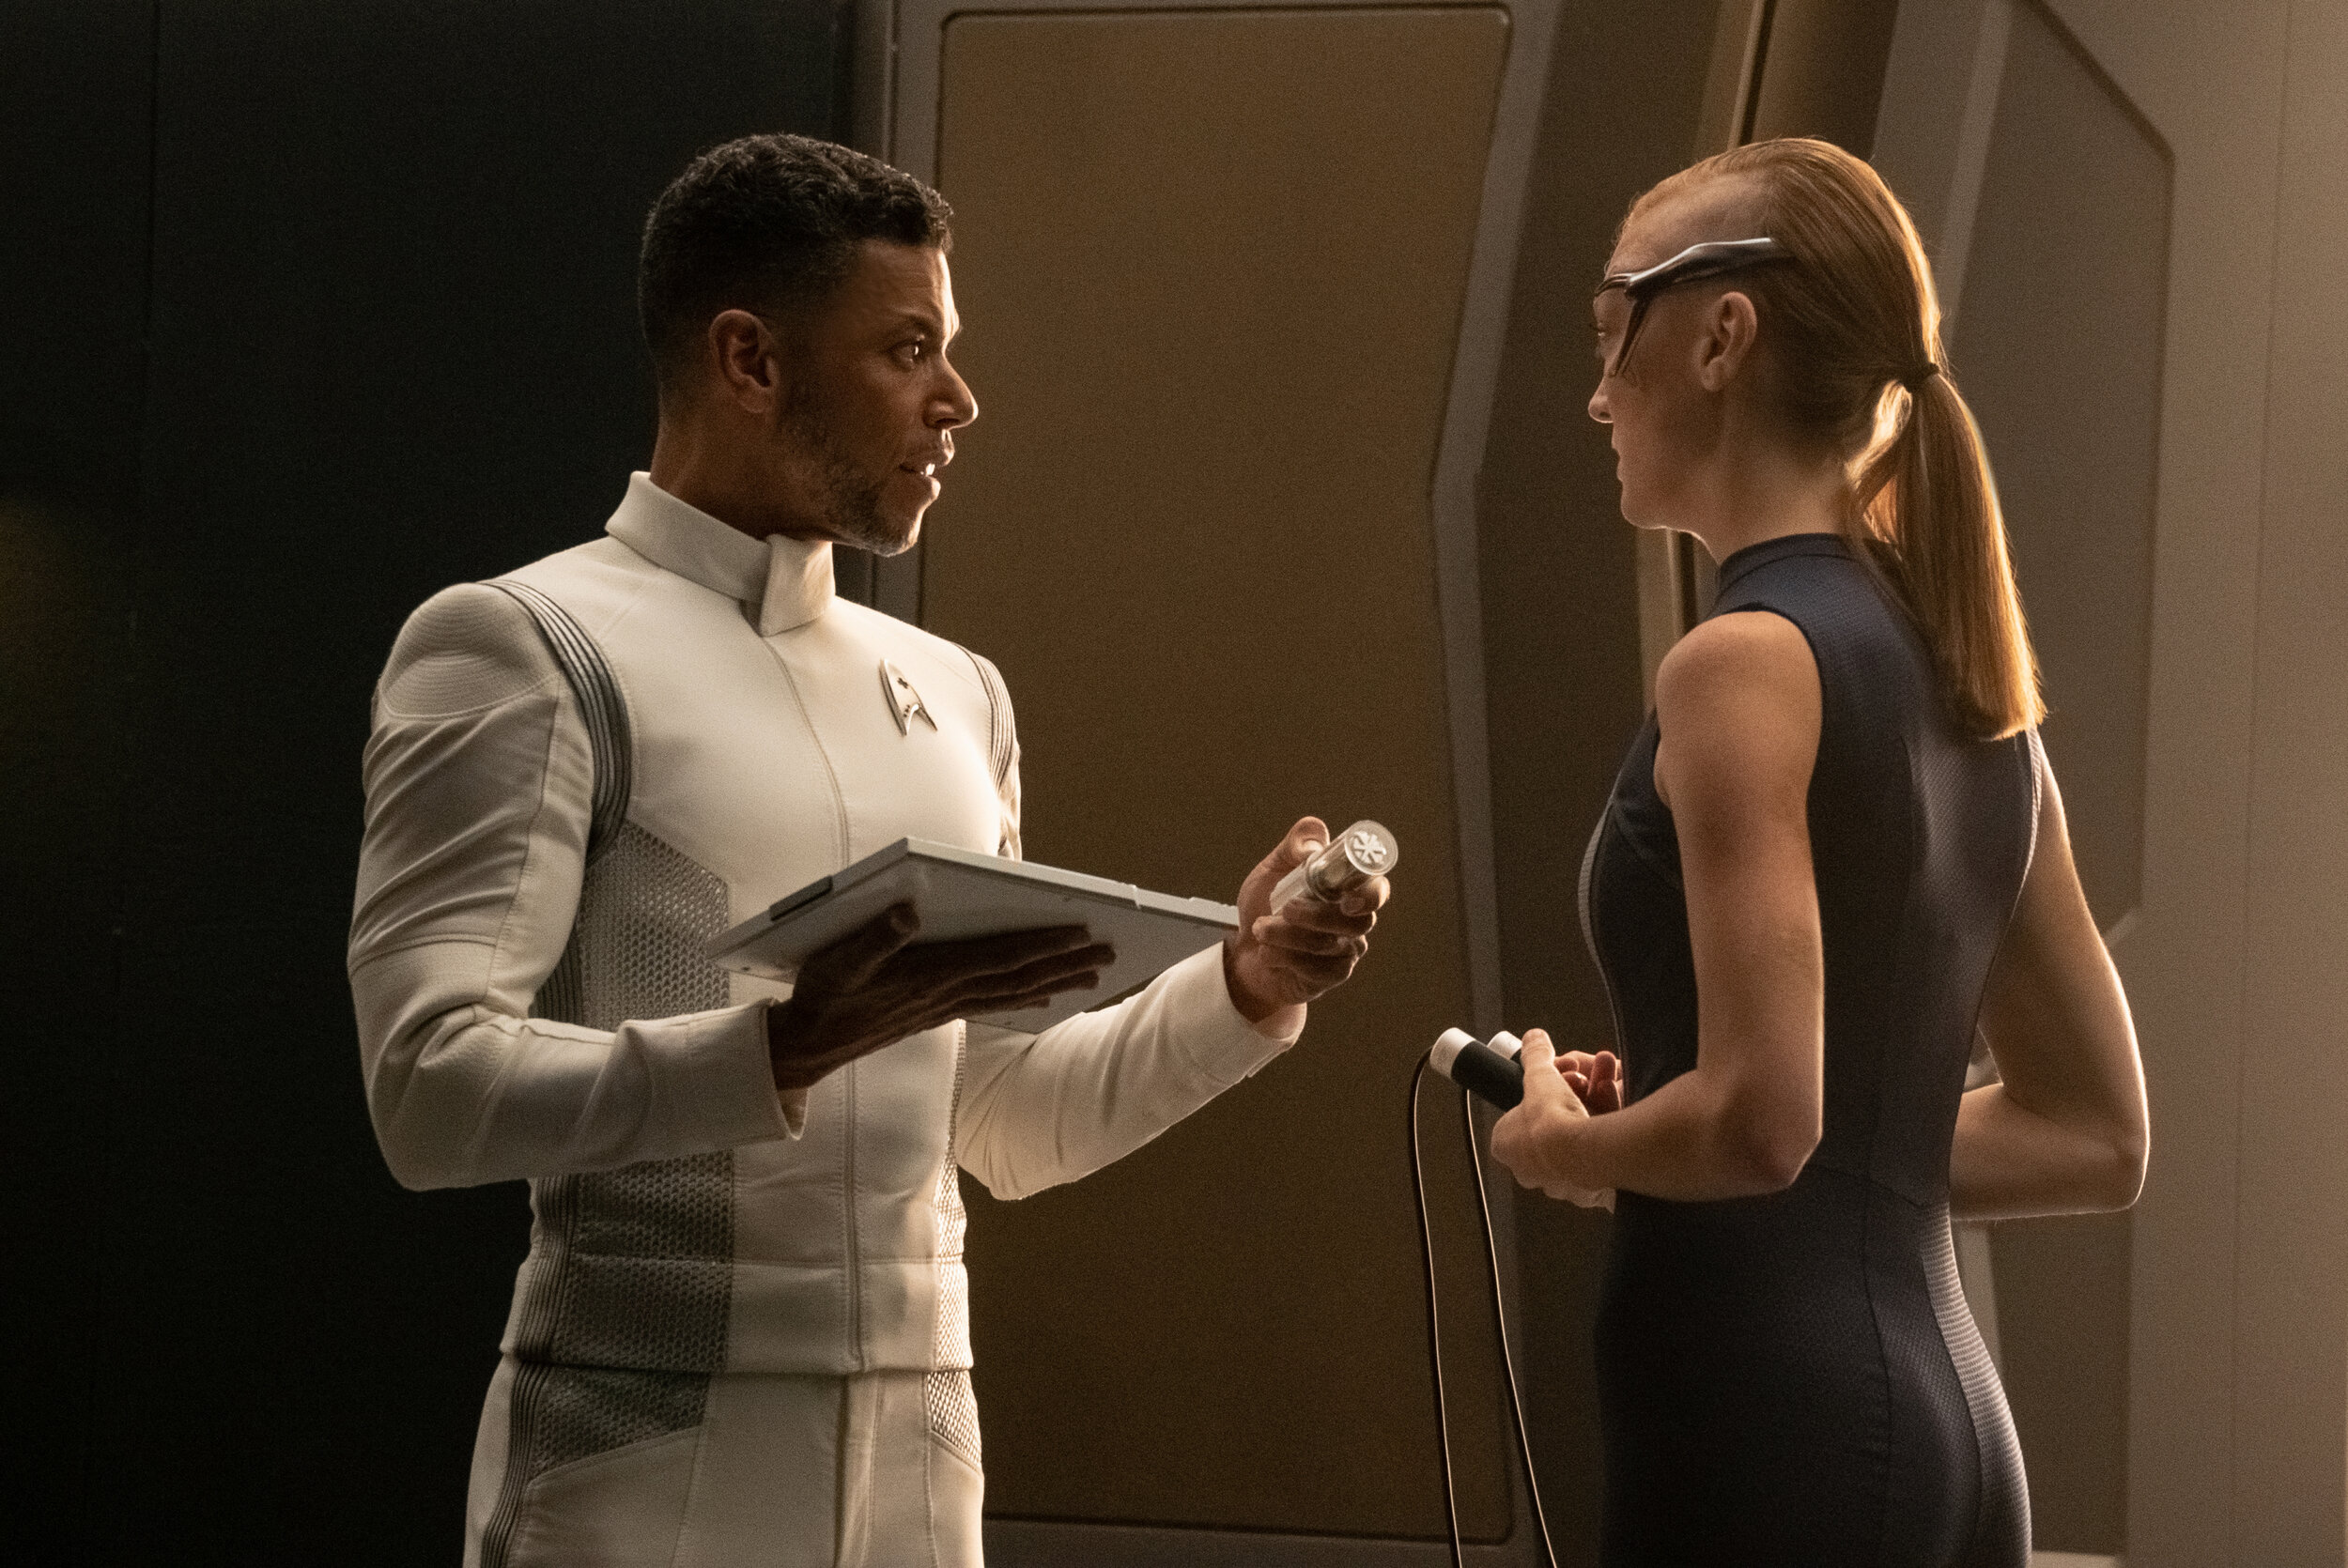   "Forget Me Not" -- Ep#304 -- Pictured: Wilson Cruz as Dr. Hugh Culber and Emily Coutts as Lt. Keyla Detmer of the CBS All Access series STAR TREK: DISCOVERY. Photo Cr: Michael Gibson/CBS ©2020 CBS Interactive, Inc. All Rights Reserved.  